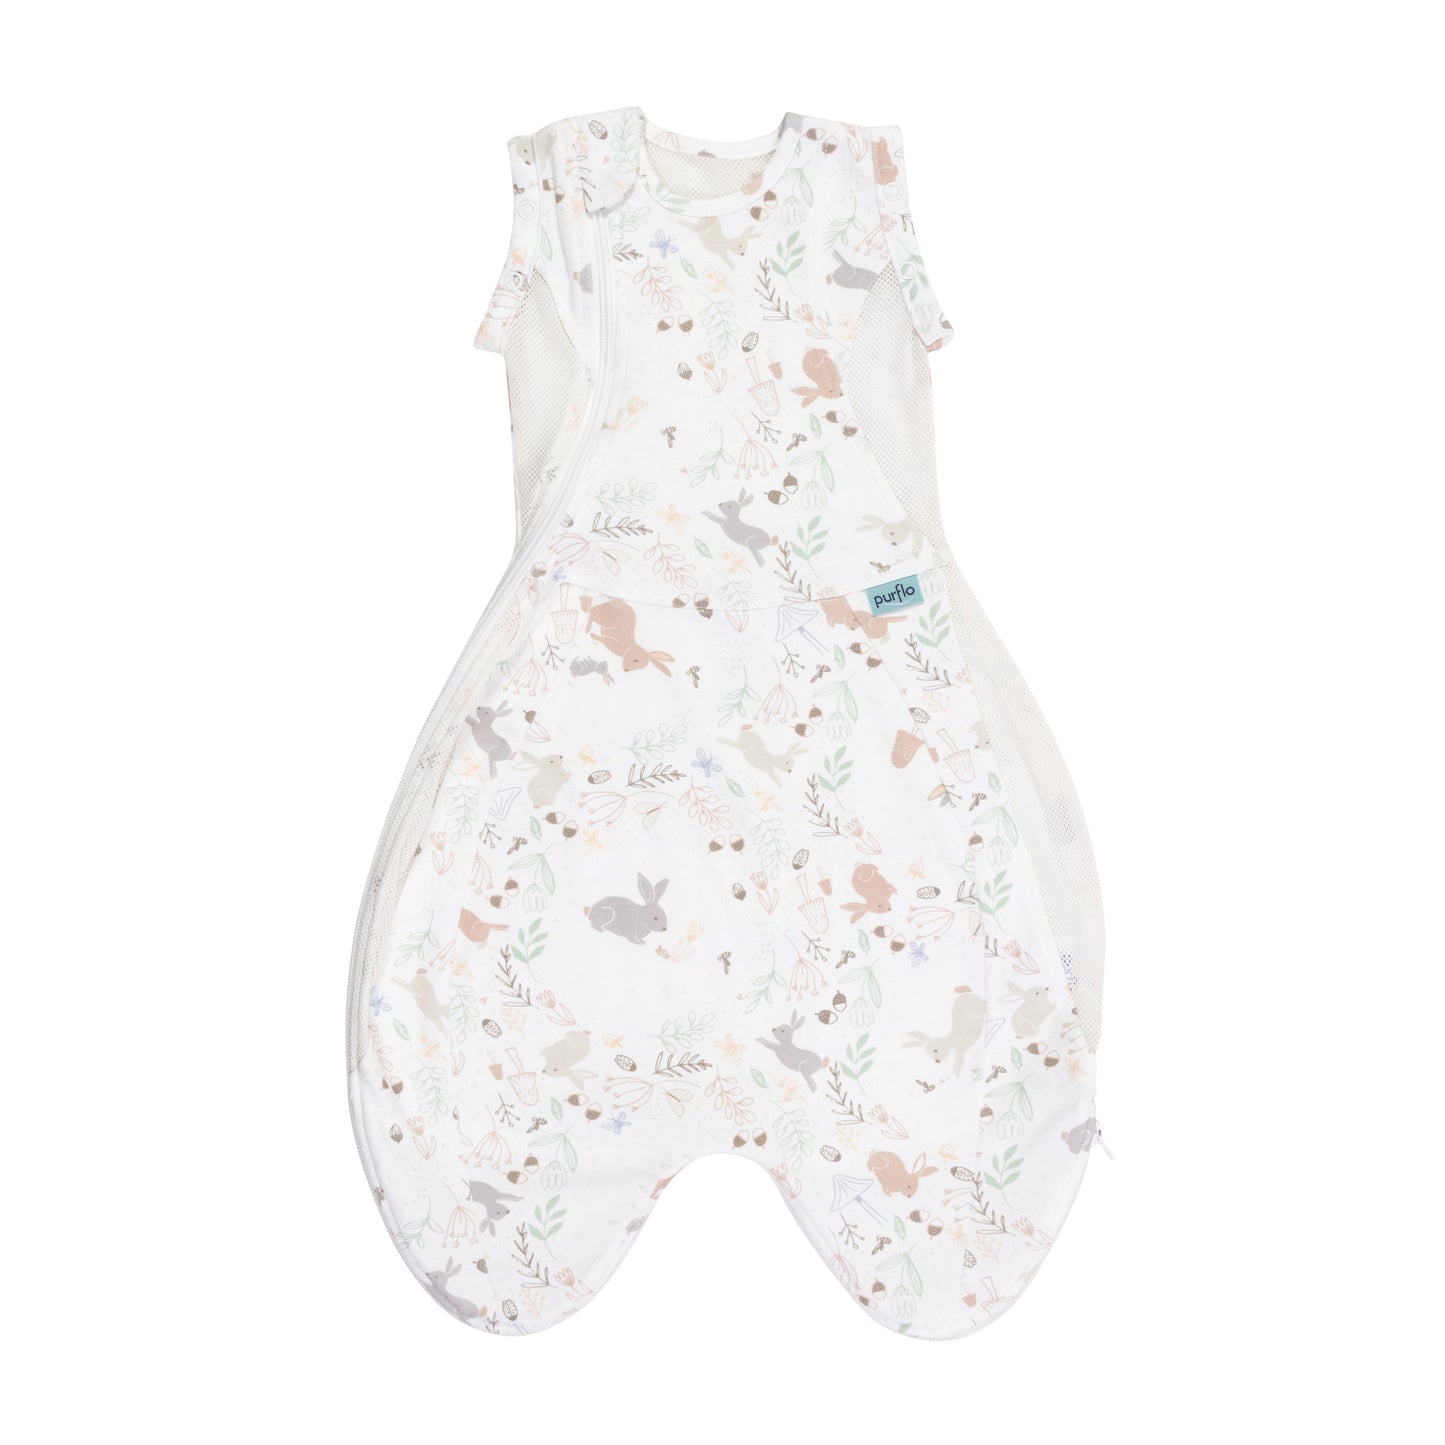 A swaddle bag that grows with baby. Swaddle arms in for newborn and out as baby grows up to 4 months